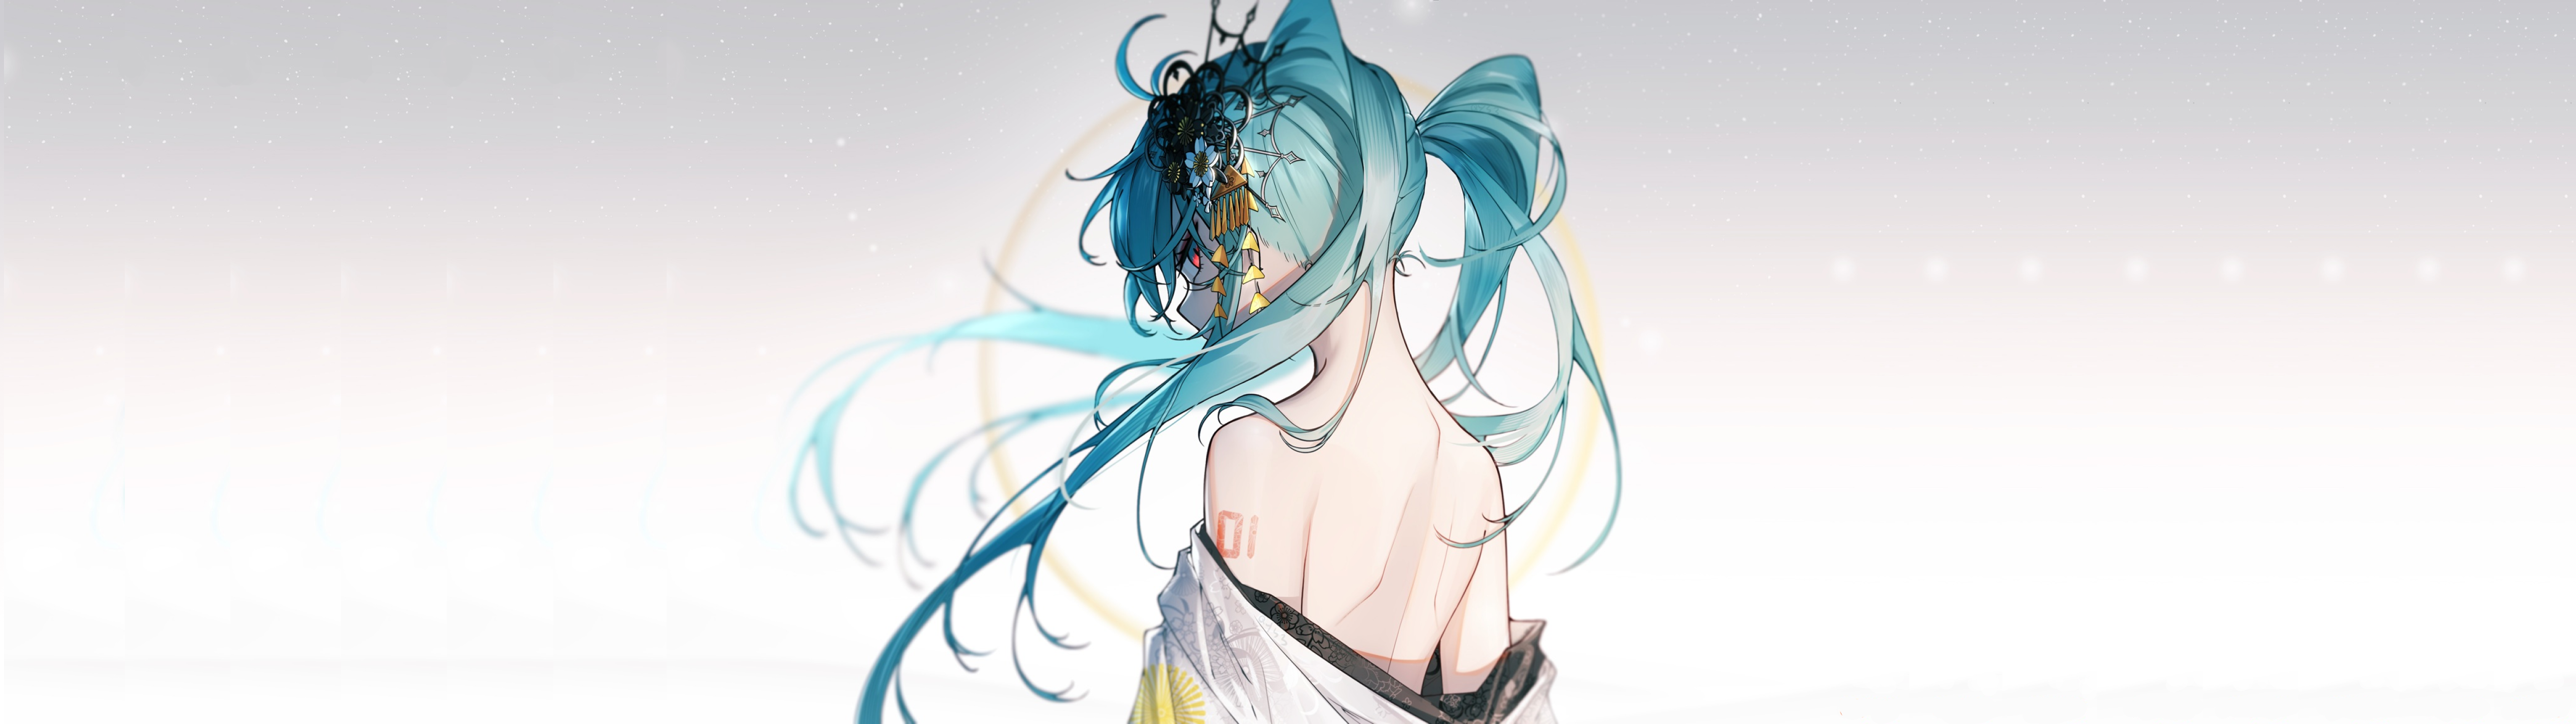 Anime 5120x1440 women Hatsune Miku Vocaloid bareback anime girls looking back looking at viewer twintails blue hair minimalism simple background white background